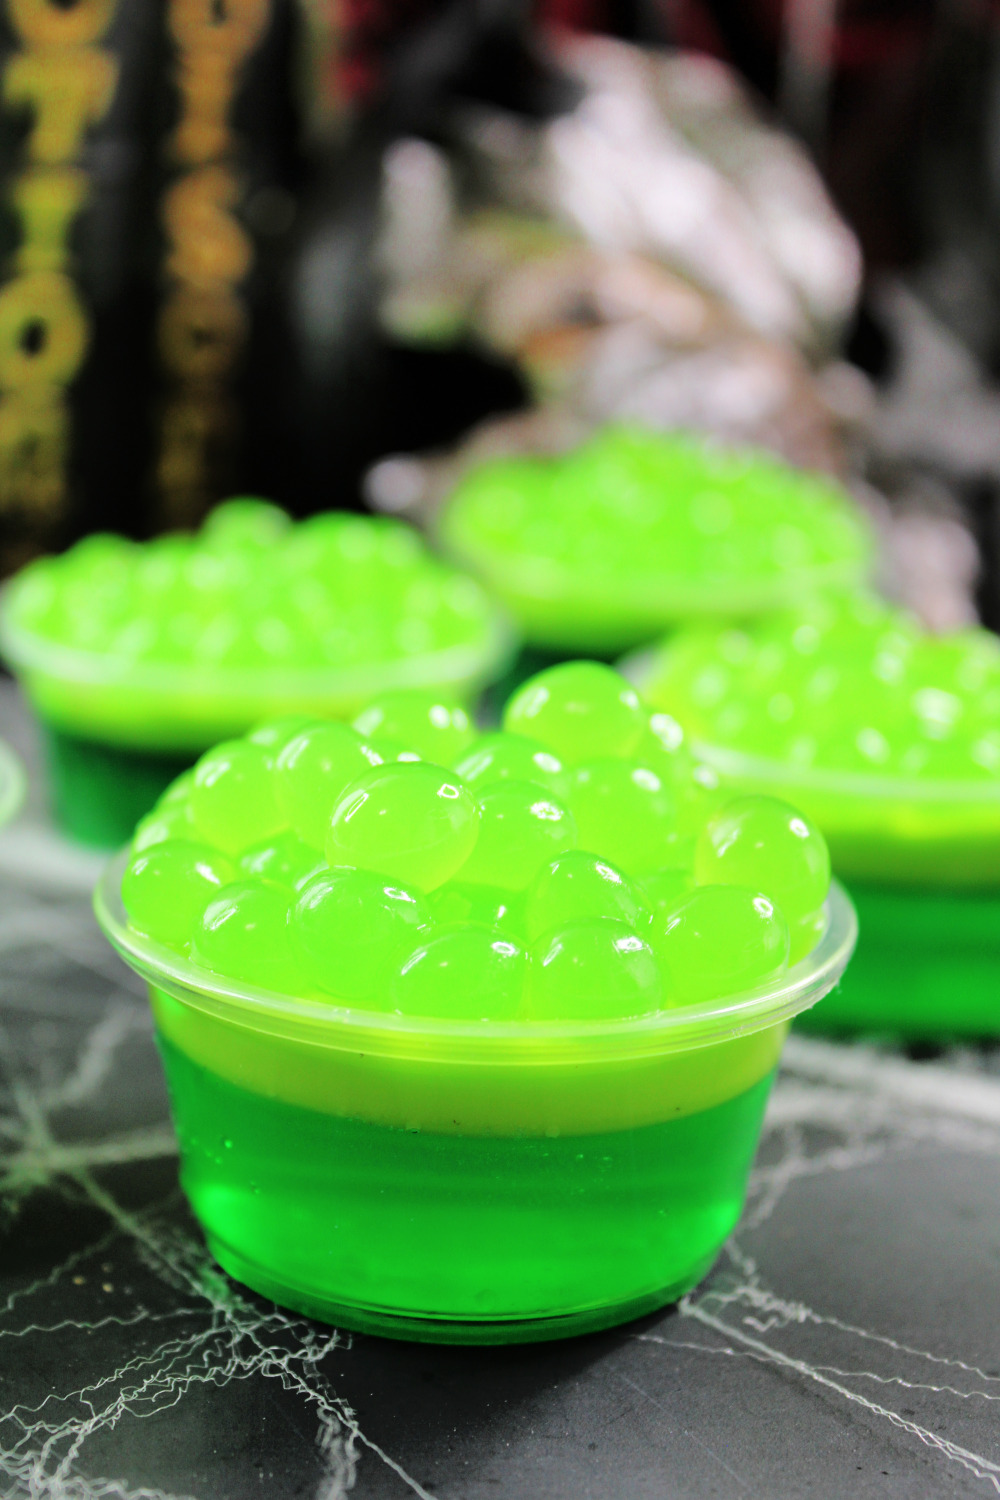 Bubbly Witches Brew Jello Shots for Halloween Parties. These green jello shots are sitting on a spiderweb background. The tops of the jello shots are topped with green apple popping bobas.